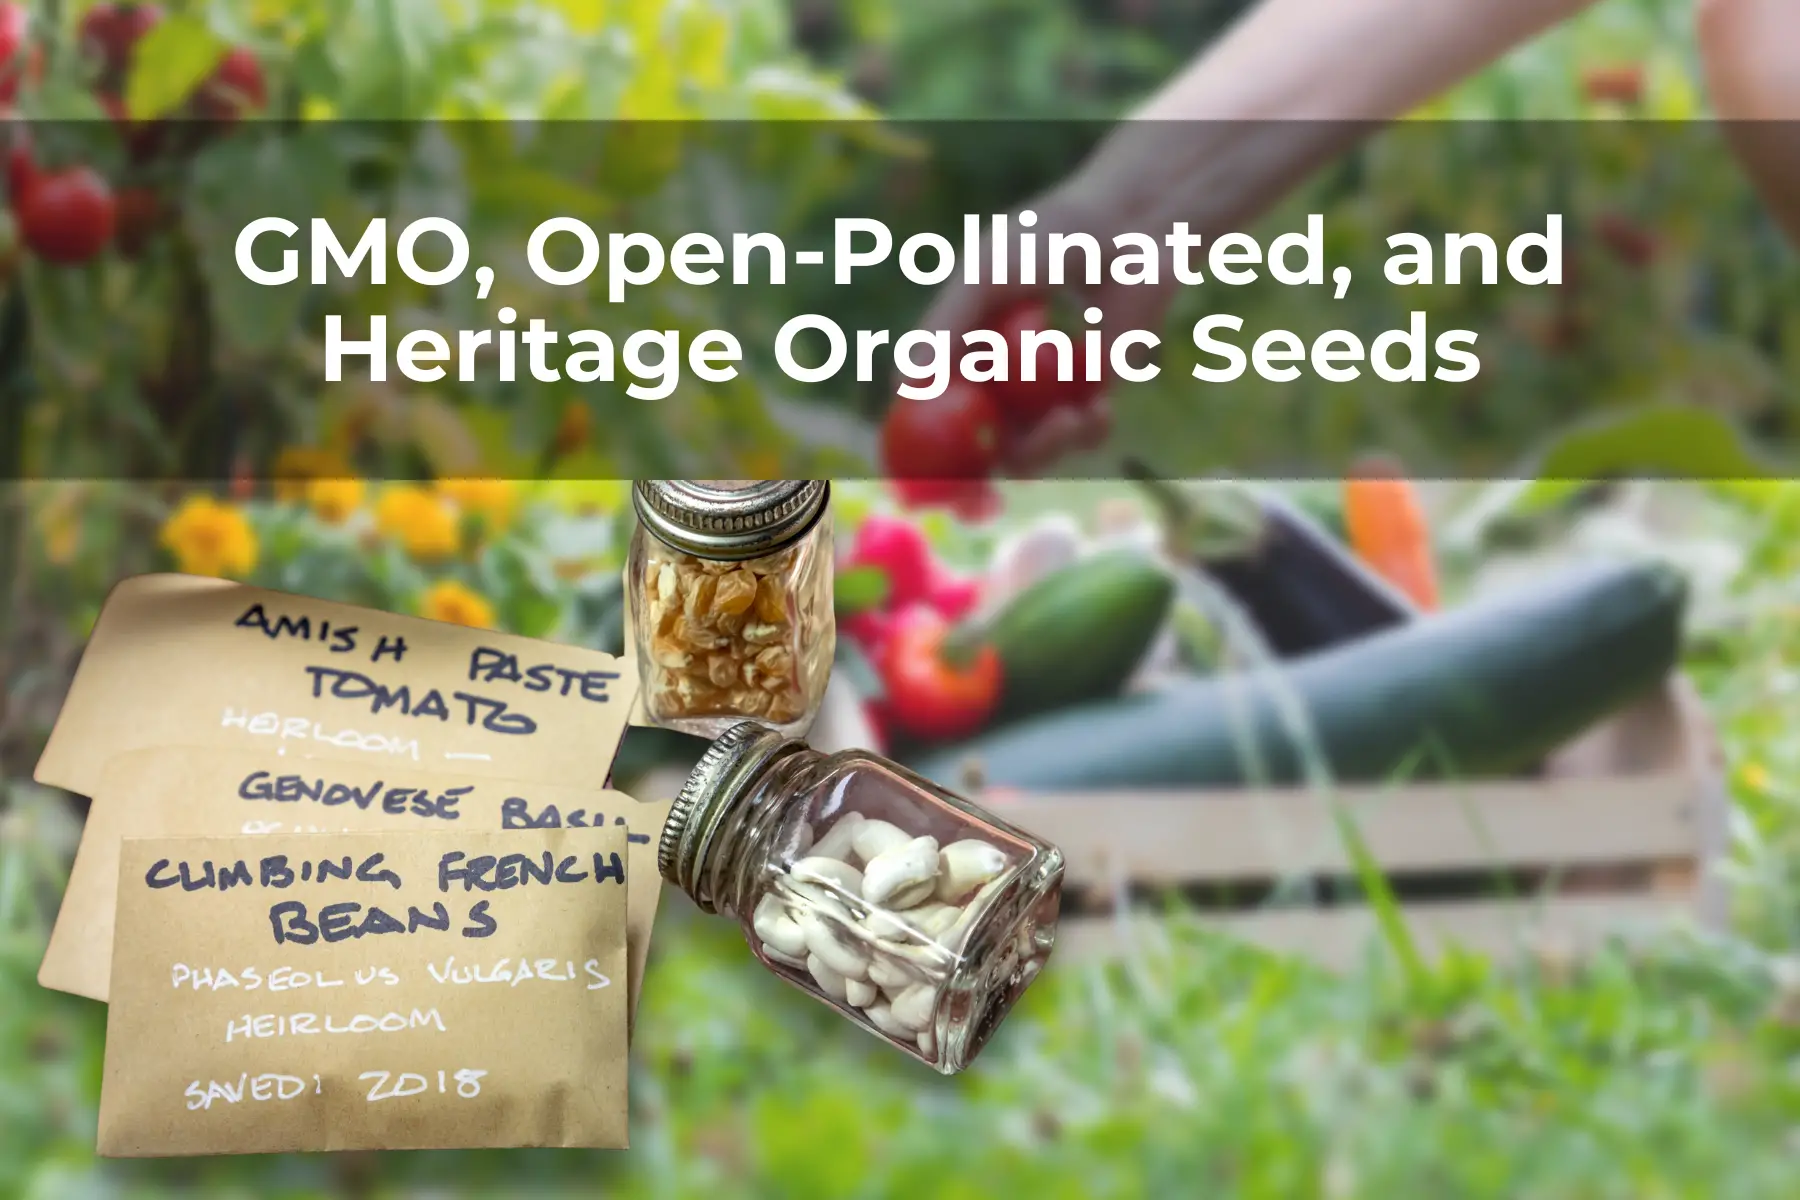 GMO, Open-Pollinated, and Heritage Organic Seeds